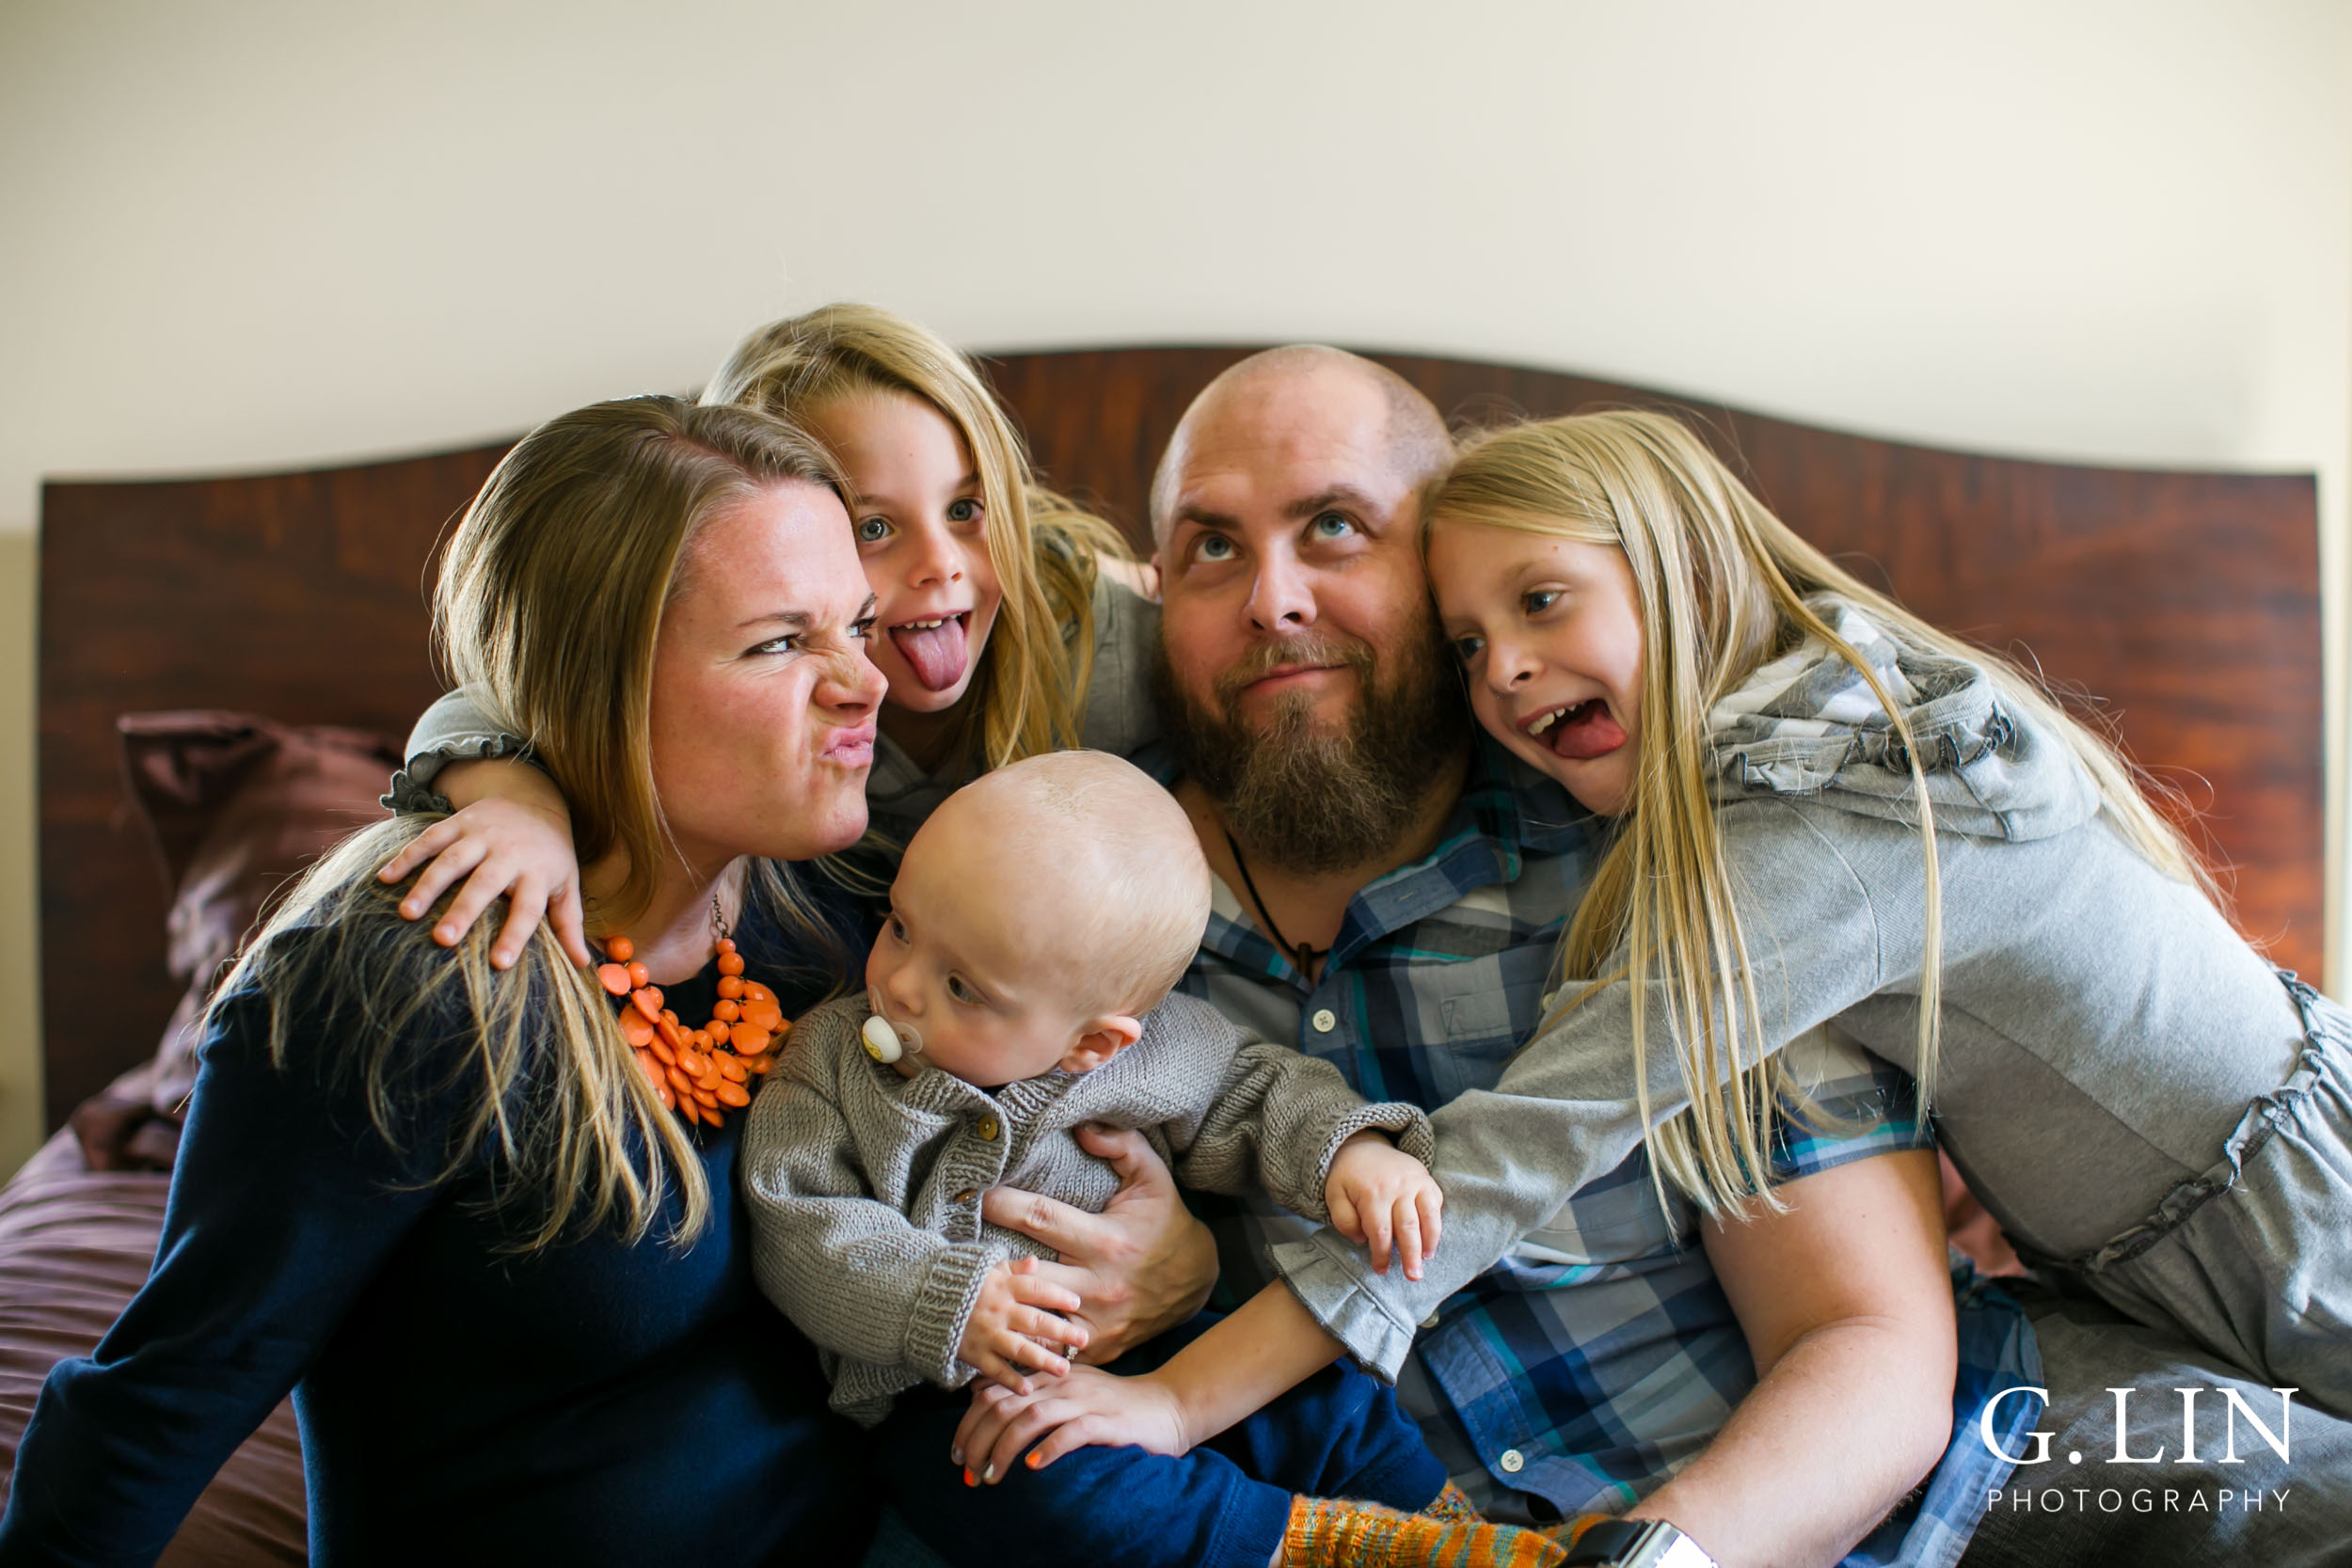 Silly faces made by family for portrait session